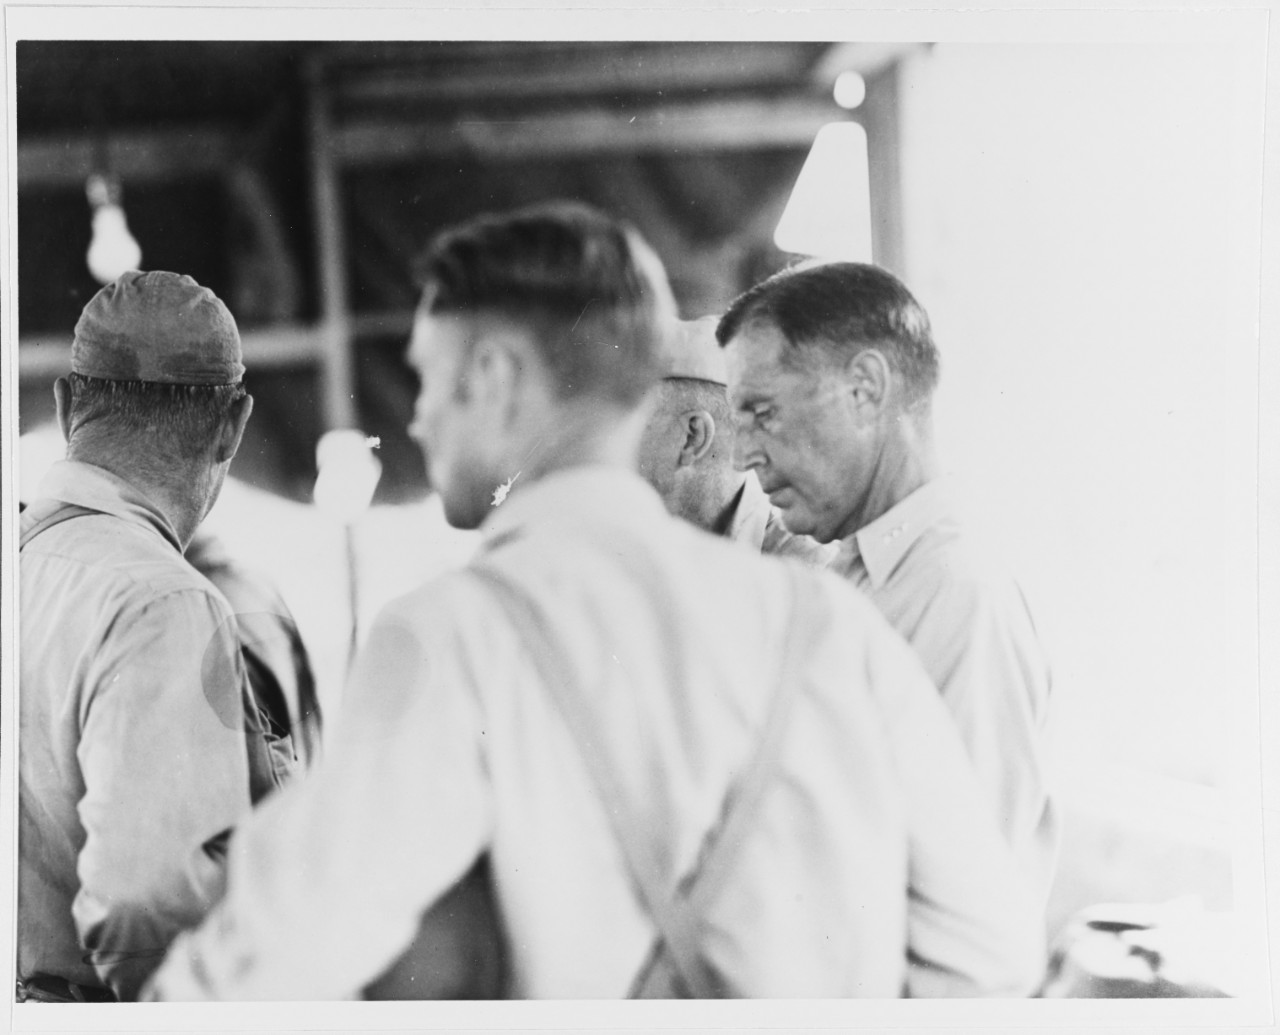 After the U.S. Marines had taken Betio Island, Tarawa Atoll, ADM C.W. Nimitz, Cincpac, inspected the island. Shown here at Headquarters are Capt. Tate (back to camera) and VADM R.A. Spruance, ComFifthFleet, 27 Nov. 1943.